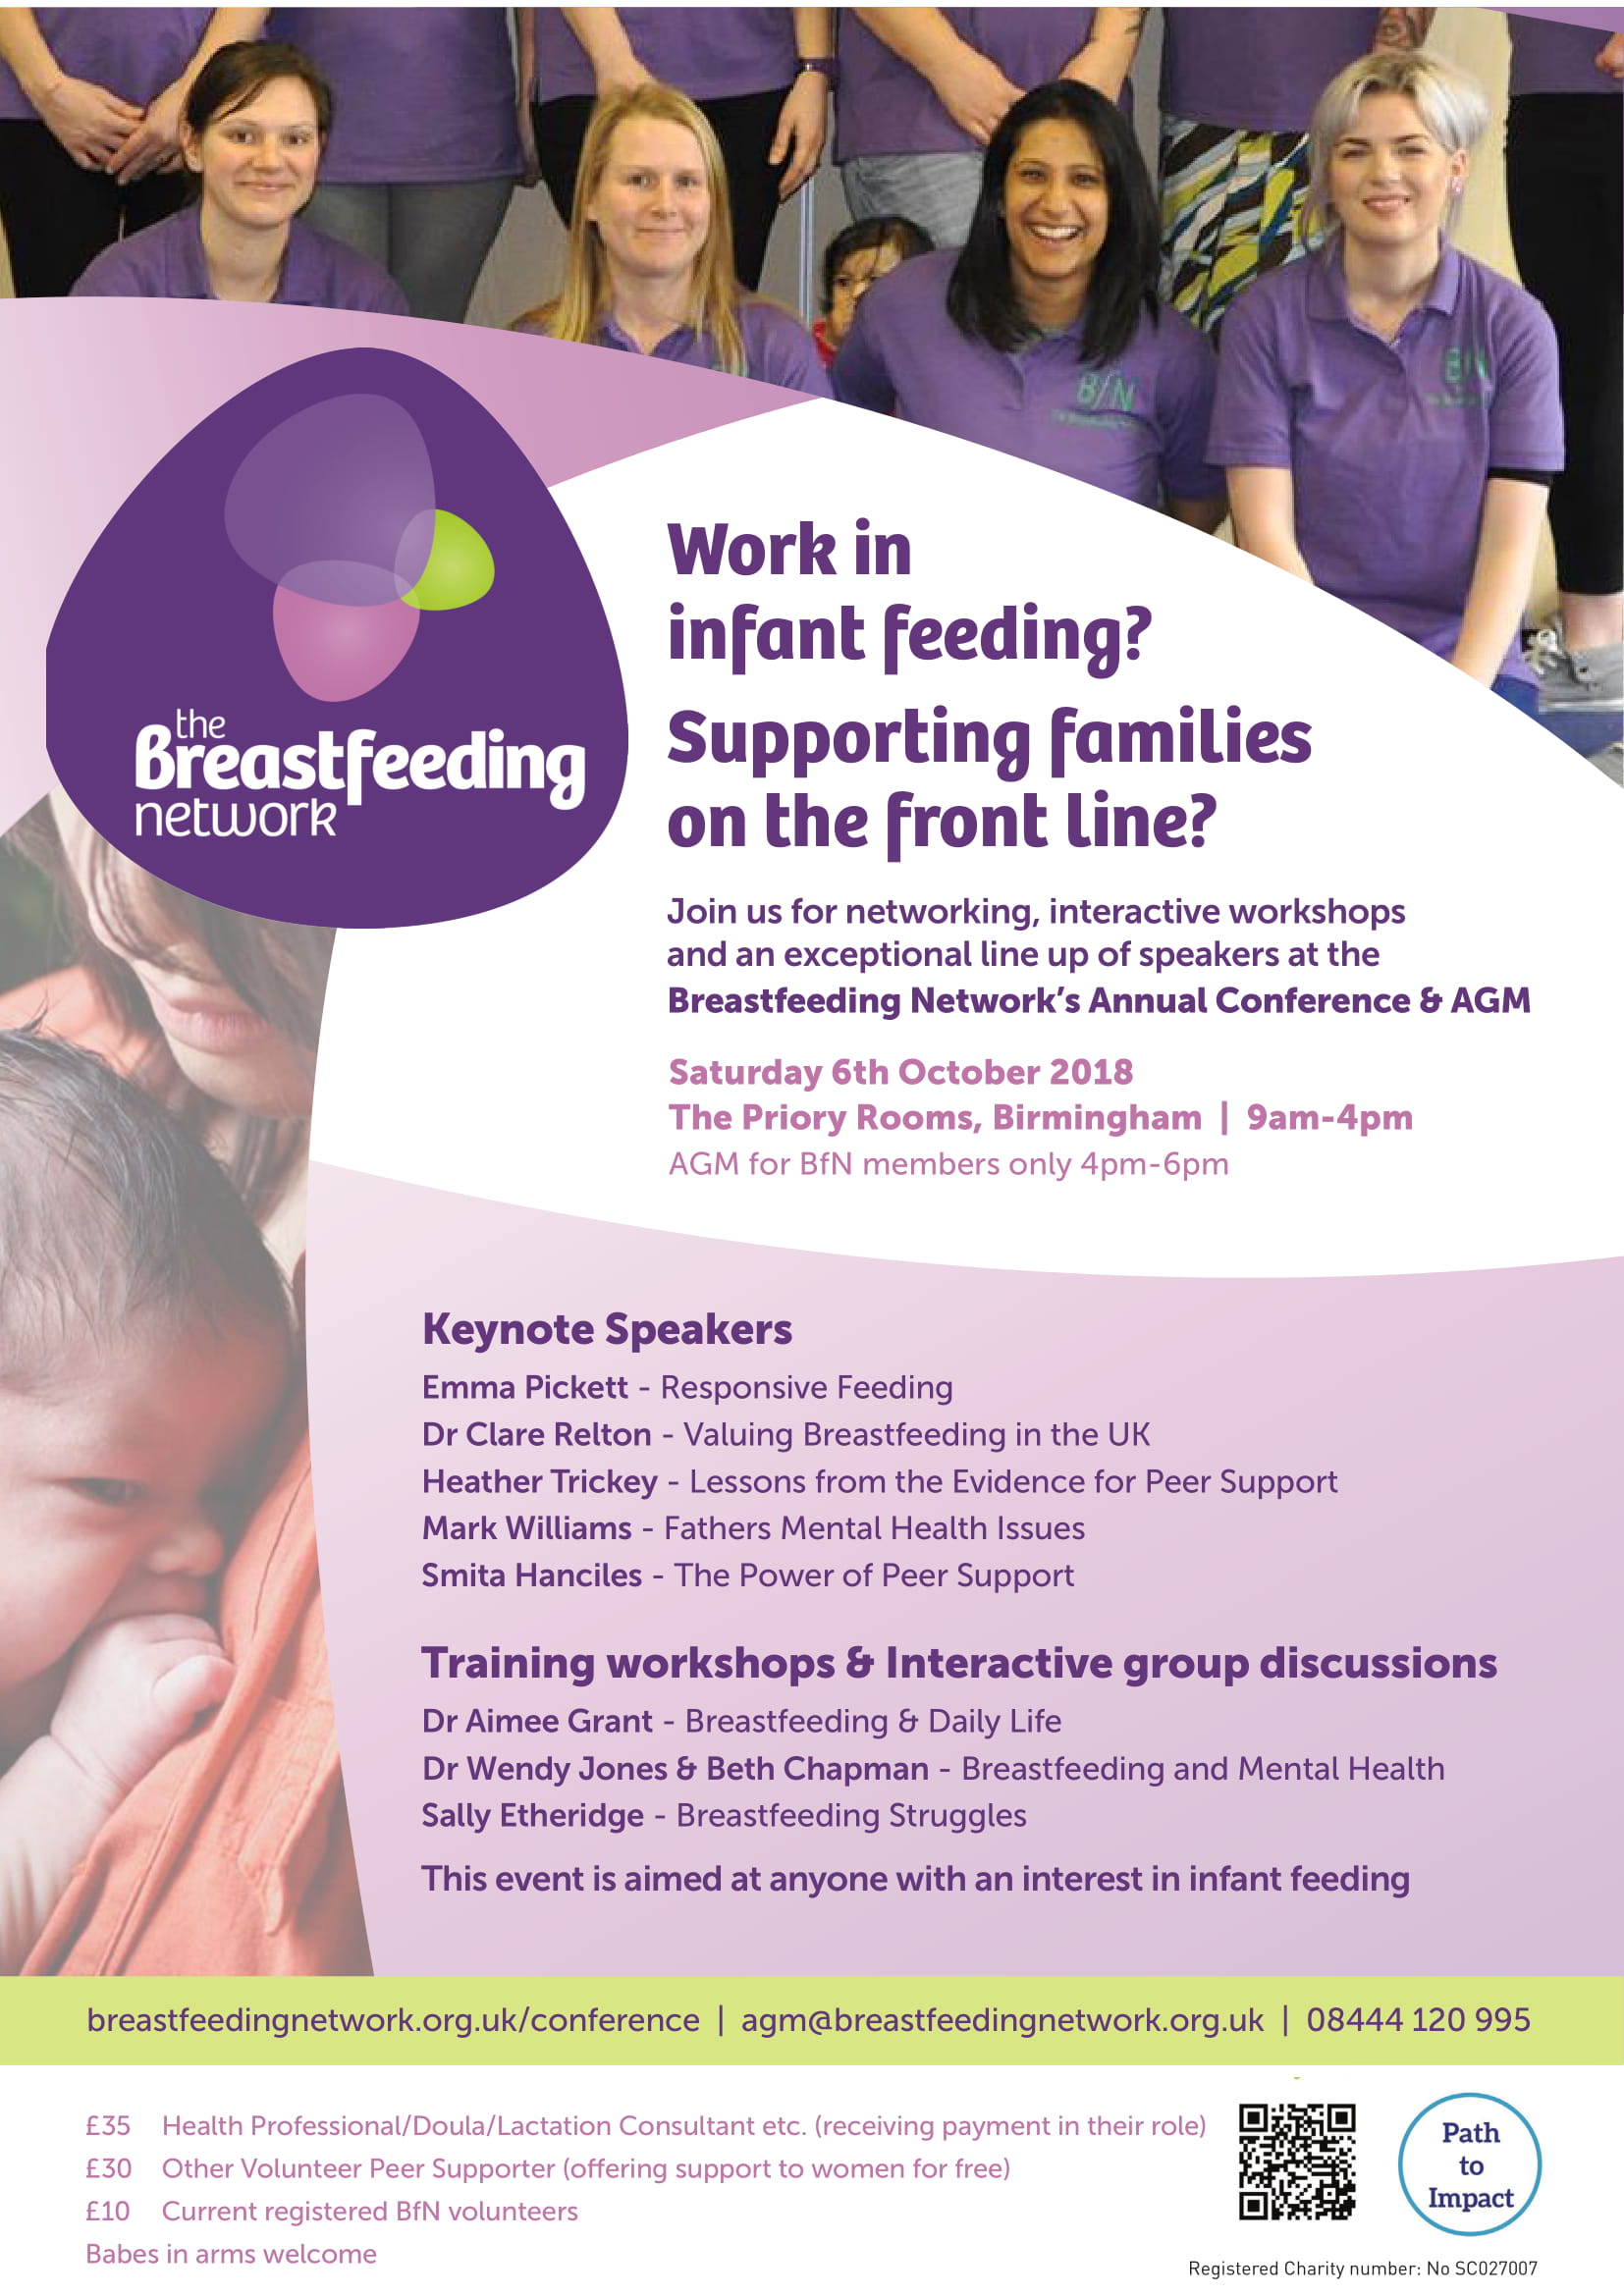 BFN poster - Conference & AGM jpg - The Breastfeeding Network